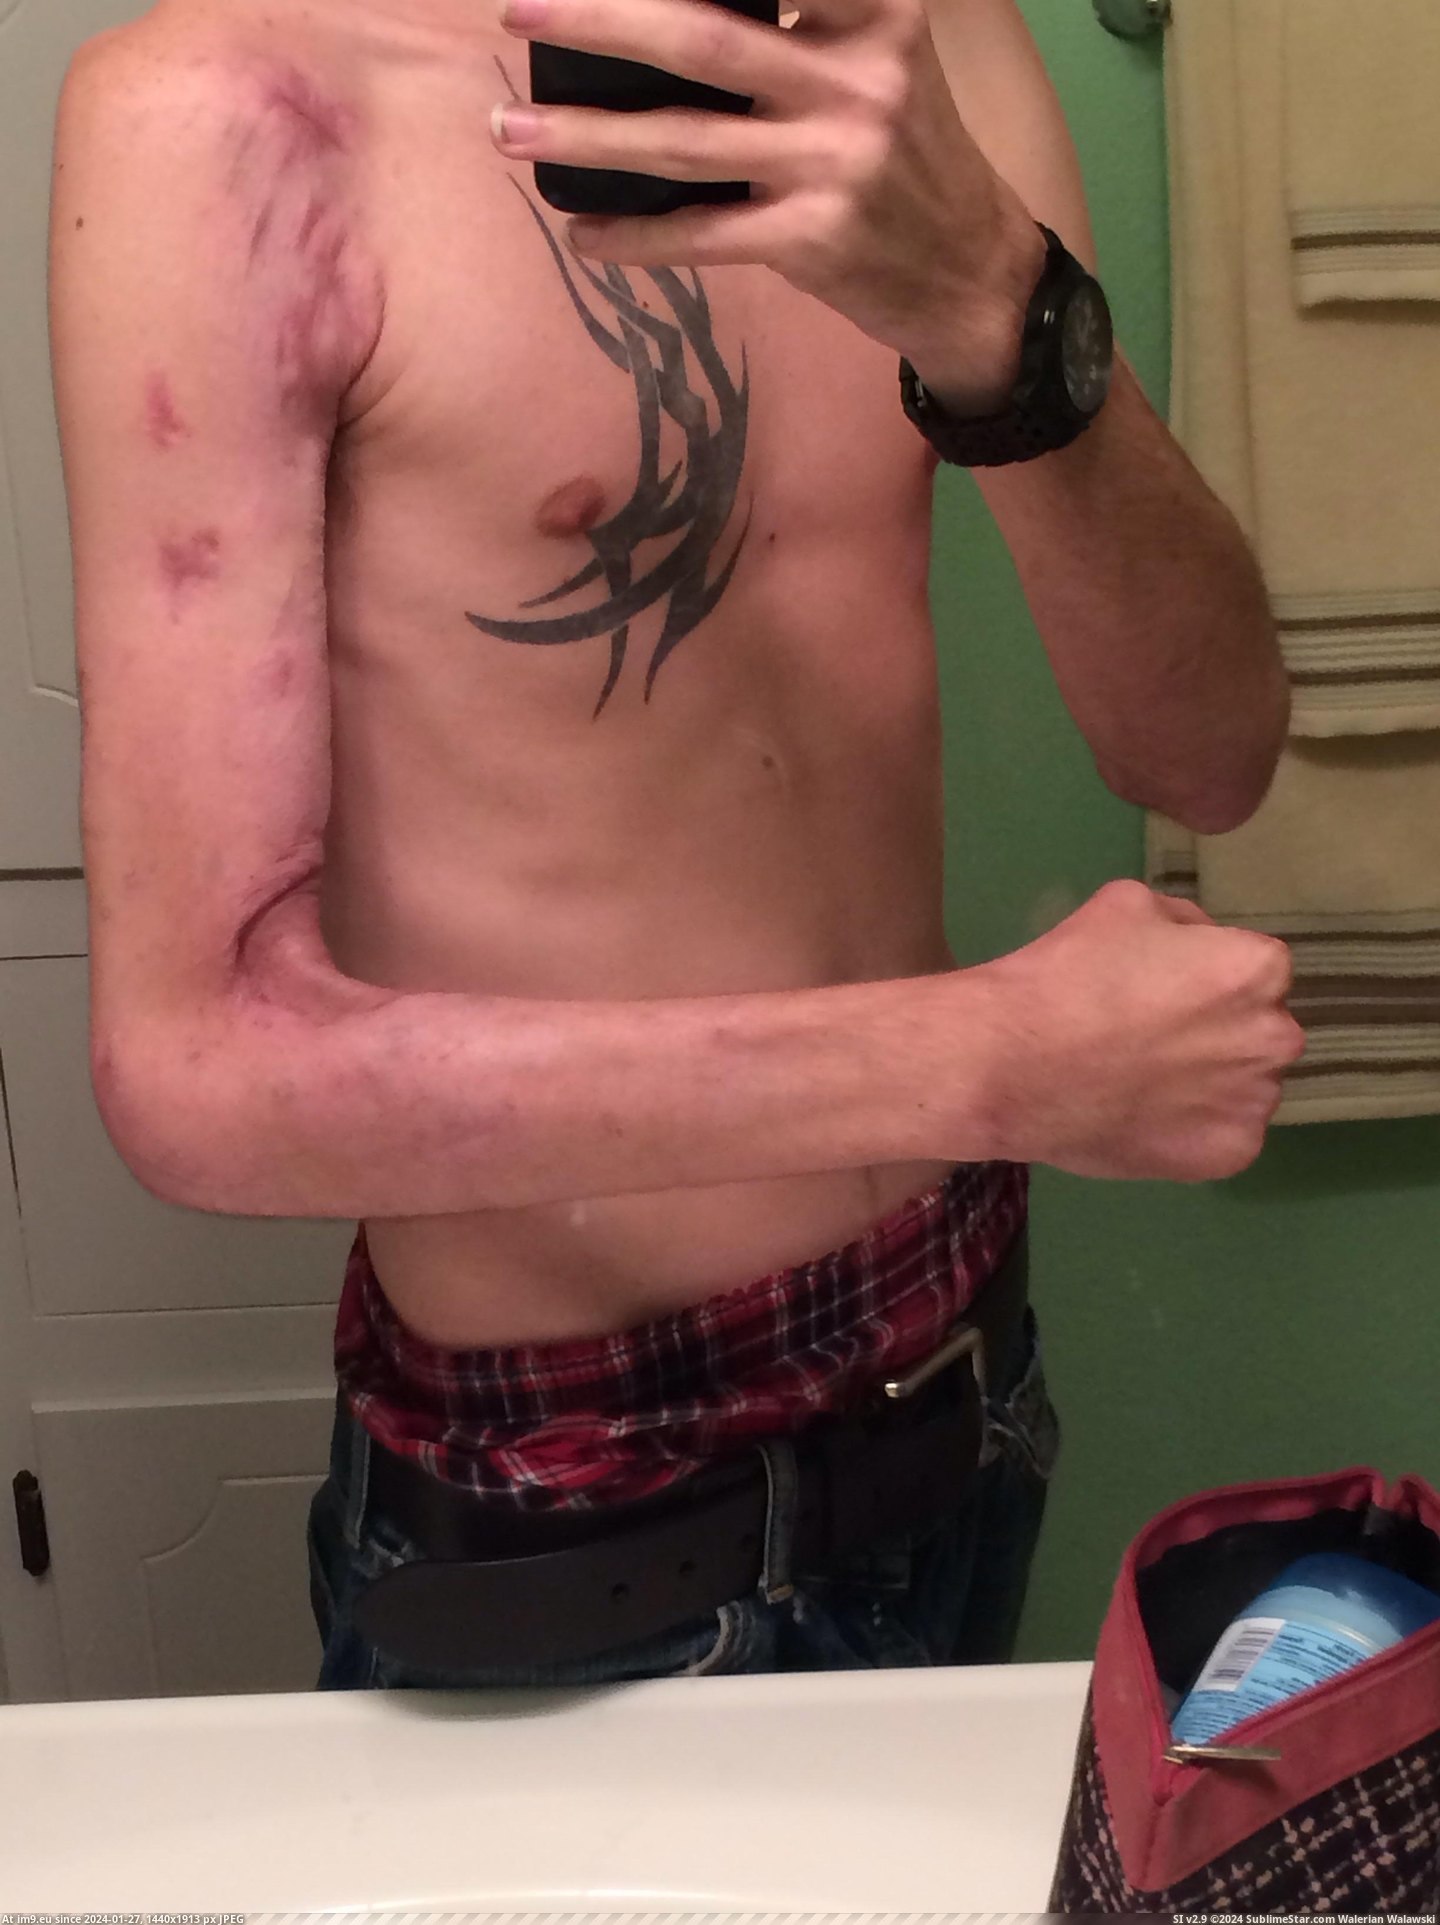 #Wtf #Day #Car #Arm #Wreck #Months #Left #Happened [Wtf] My left arm after a car wreck. From the day it happened until now, 6 months later 3 Pic. (Image of album My r/WTF favs))